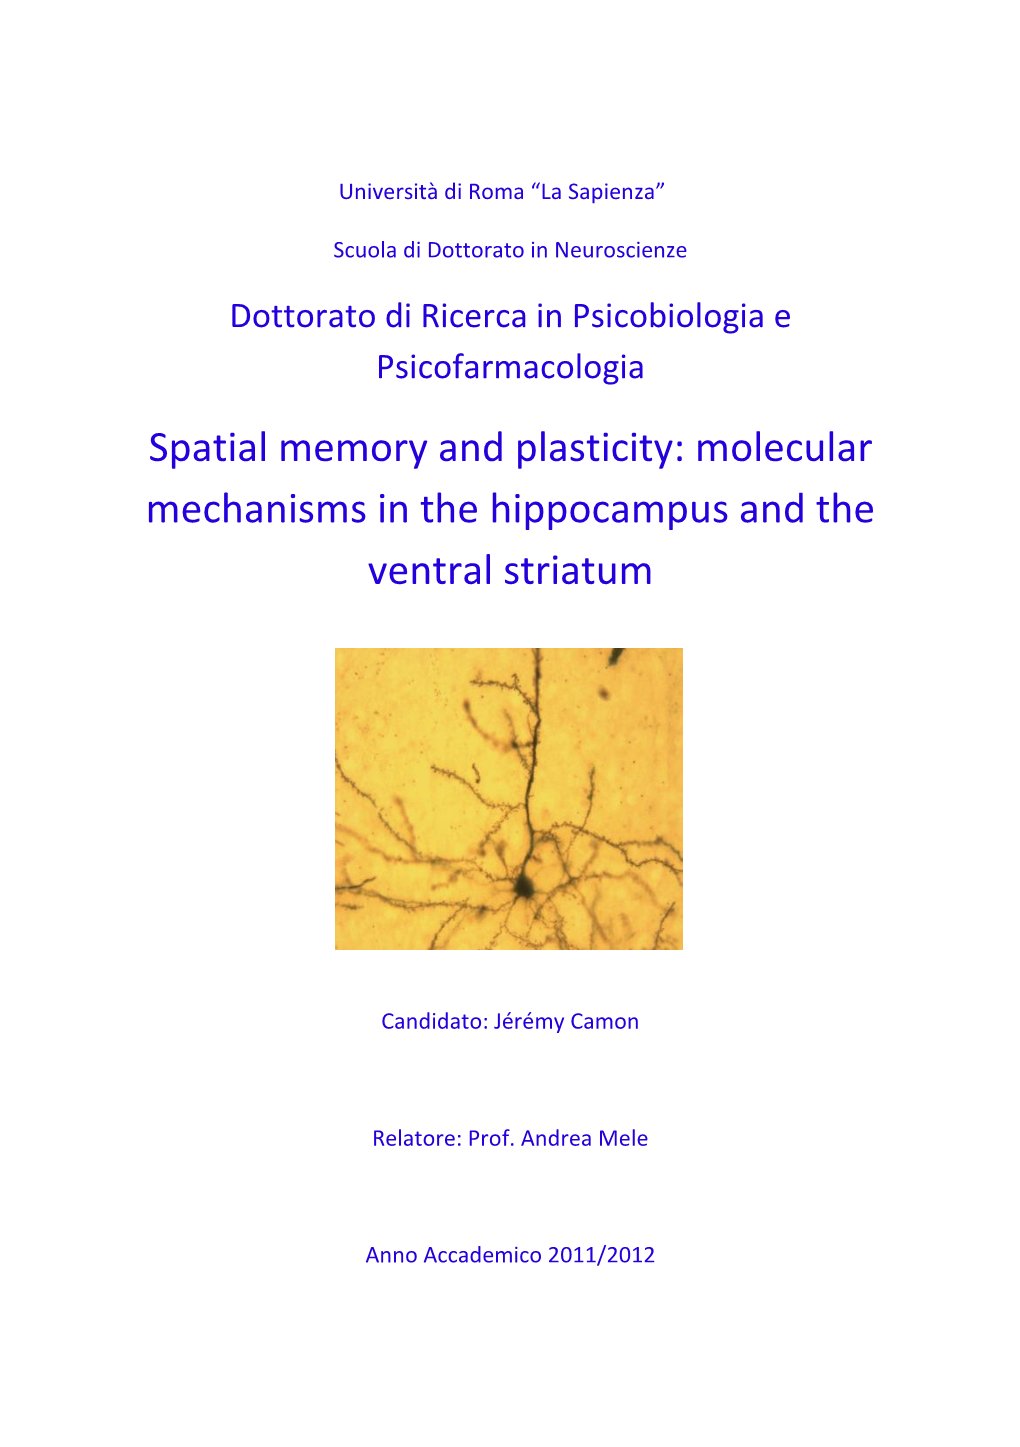 Spatial Memory and Plasticity: Molecular Mechanisms in the Hippocampus and the Ventral Striatum